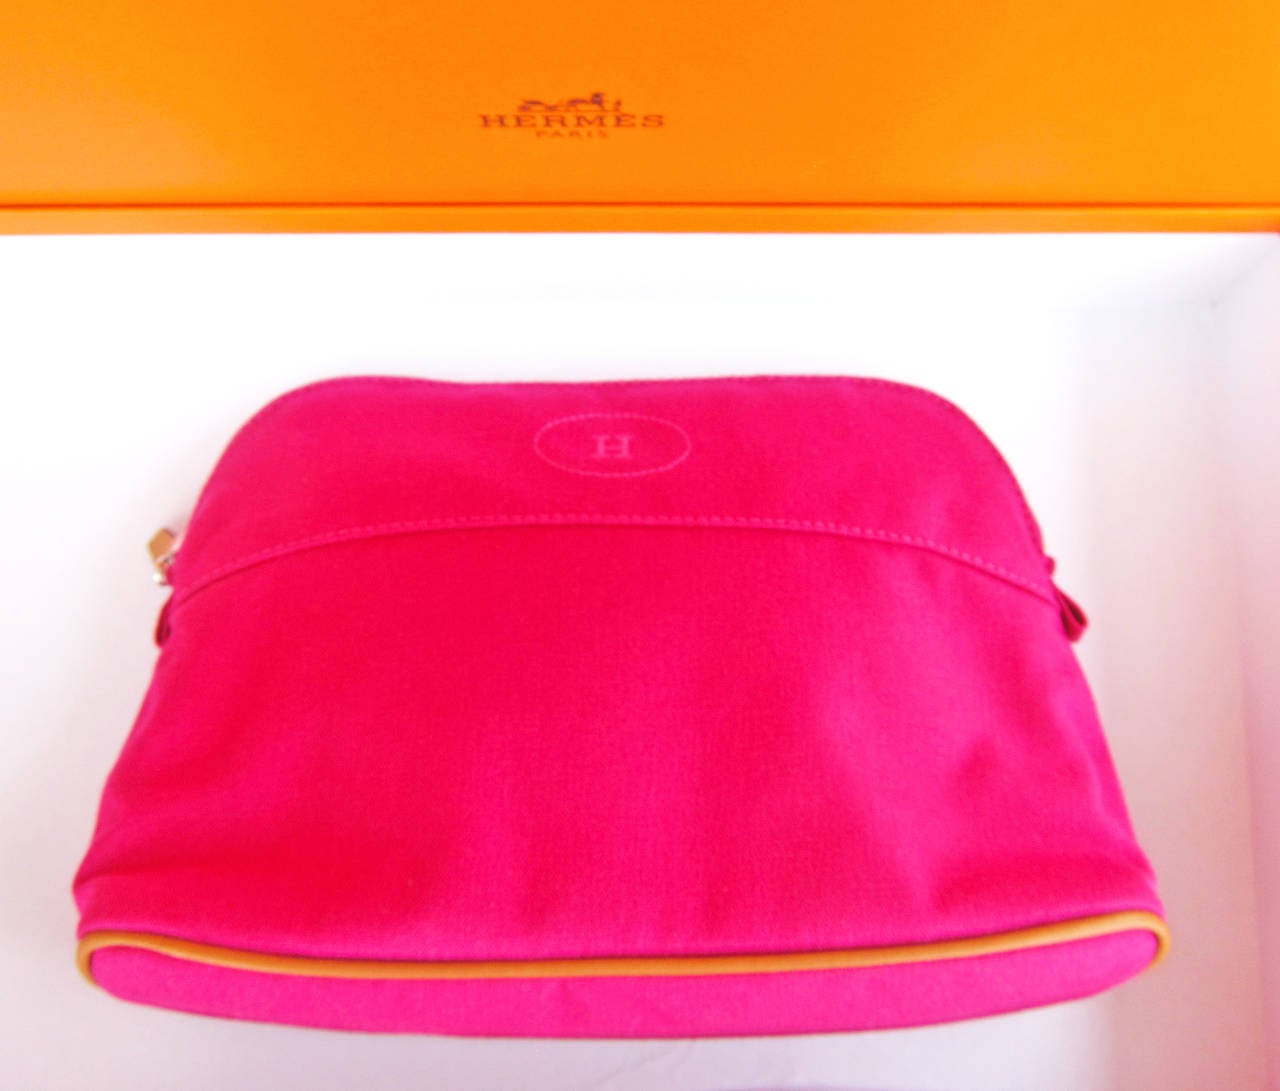 Hermes Fuchsia Bolide Toiletry Beach and Travel Case MM at 1stdibs  